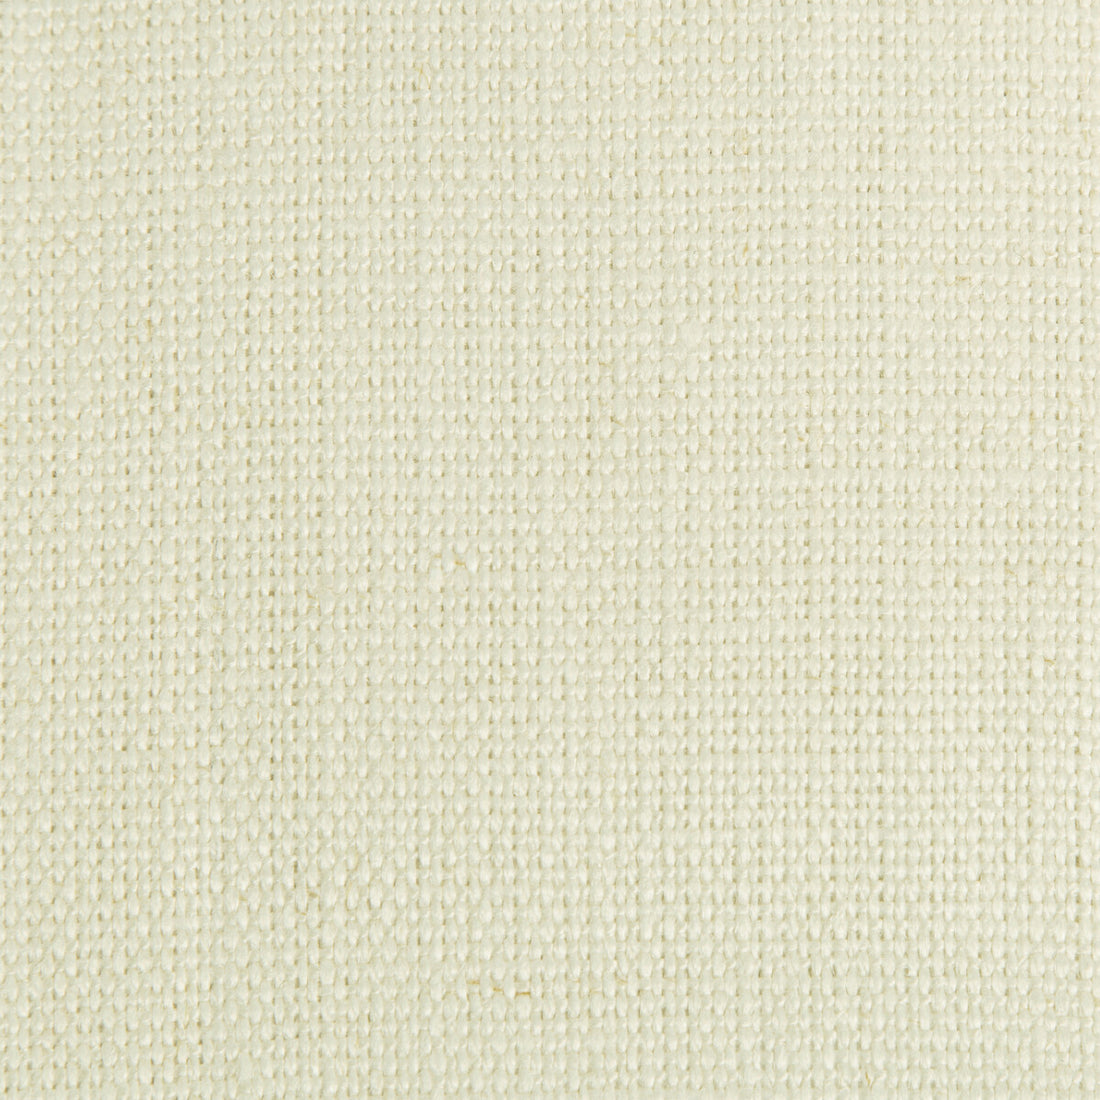 Hampton Linen fabric in cotton ball color - pattern 2012171.1001.0 - by Lee Jofa in the Colour Complements II collection